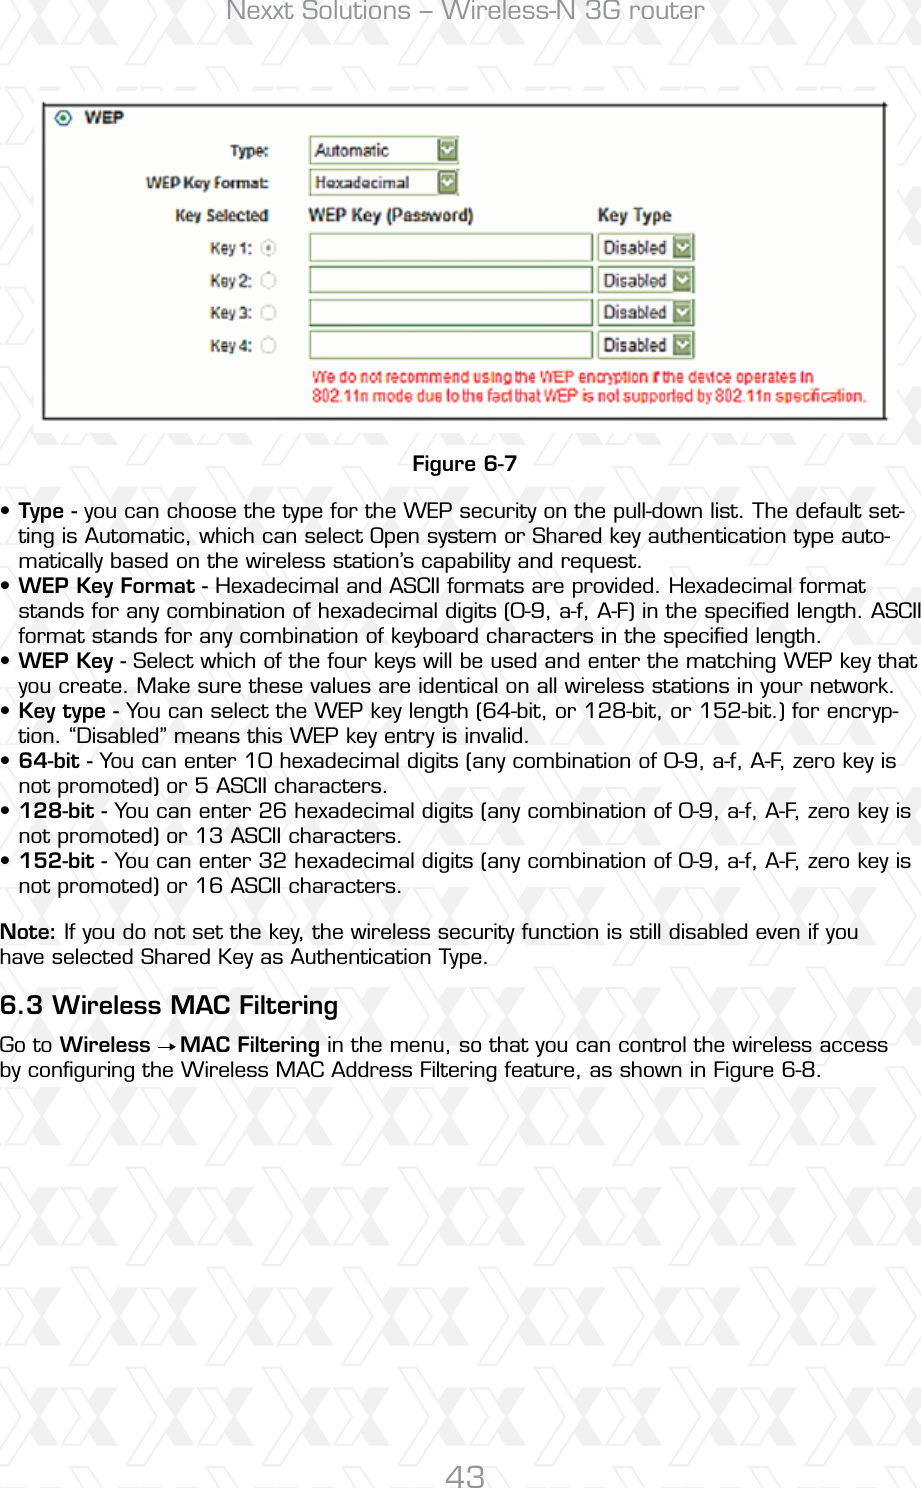 Nexxt Solutions – Wireless-N 3G router43Figure 6-76.3 Wireless MAC FilteringType - you can choose the type for the WEP security on the pull-down list. The default set-ting is Automatic, which can select Open system or Shared key authentication type auto-matically based on the wireless station’s capability and request. WEP Key Format - Hexadecimal and ASCII formats are provided. Hexadecimal format stands for any combination of hexadecimal digits (0-9, a-f, A-F) in the speciﬁed length. ASCII format stands for any combination of keyboard characters in the speciﬁed length. WEP Key - Select which of the four keys will be used and enter the matching WEP key that you create. Make sure these values are identical on all wireless stations in your network. Key type - You can select the WEP key length (64-bit, or 128-bit, or 152-bit.) for encryp-tion. “Disabled” means this WEP key entry is invalid. 64-bit - You can enter 10 hexadecimal digits (any combination of 0-9, a-f, A-F, zero key is not promoted) or 5 ASCII characters. 128-bit - You can enter 26 hexadecimal digits (any combination of 0-9, a-f, A-F, zero key is not promoted) or 13 ASCII characters. 152-bit - You can enter 32 hexadecimal digits (any combination of 0-9, a-f, A-F, zero key is not promoted) or 16 ASCII characters. Go to Wireless    MAC Filtering in the menu, so that you can control the wireless access by conﬁguring the Wireless MAC Address Filtering feature, as shown in Figure 6-8.Note: If you do not set the key, the wireless security function is still disabled even if you have selected Shared Key as Authentication Type.•••••••